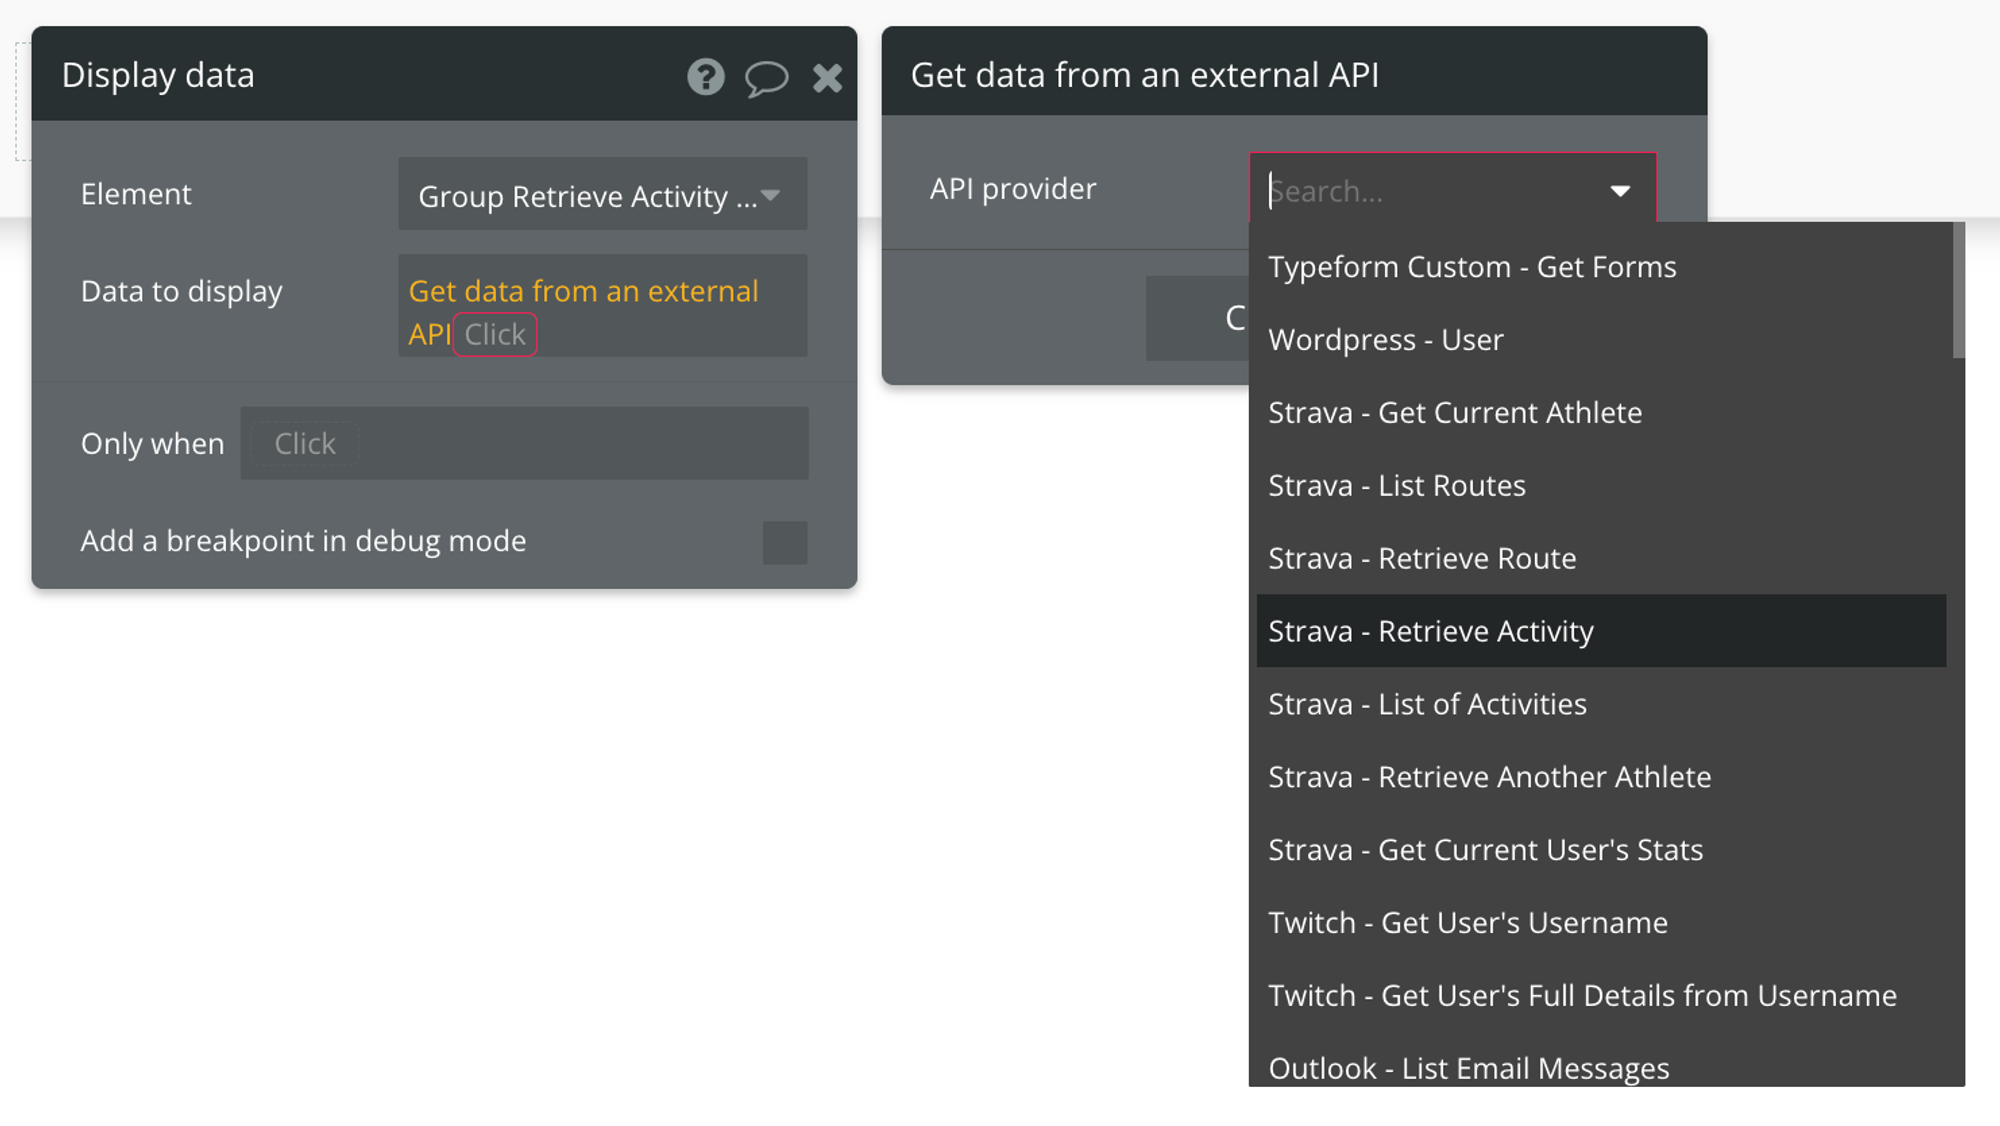 Select "Get data from external API" from the list of data sources, then find Strava - Retrieve Activity from the list of API providers